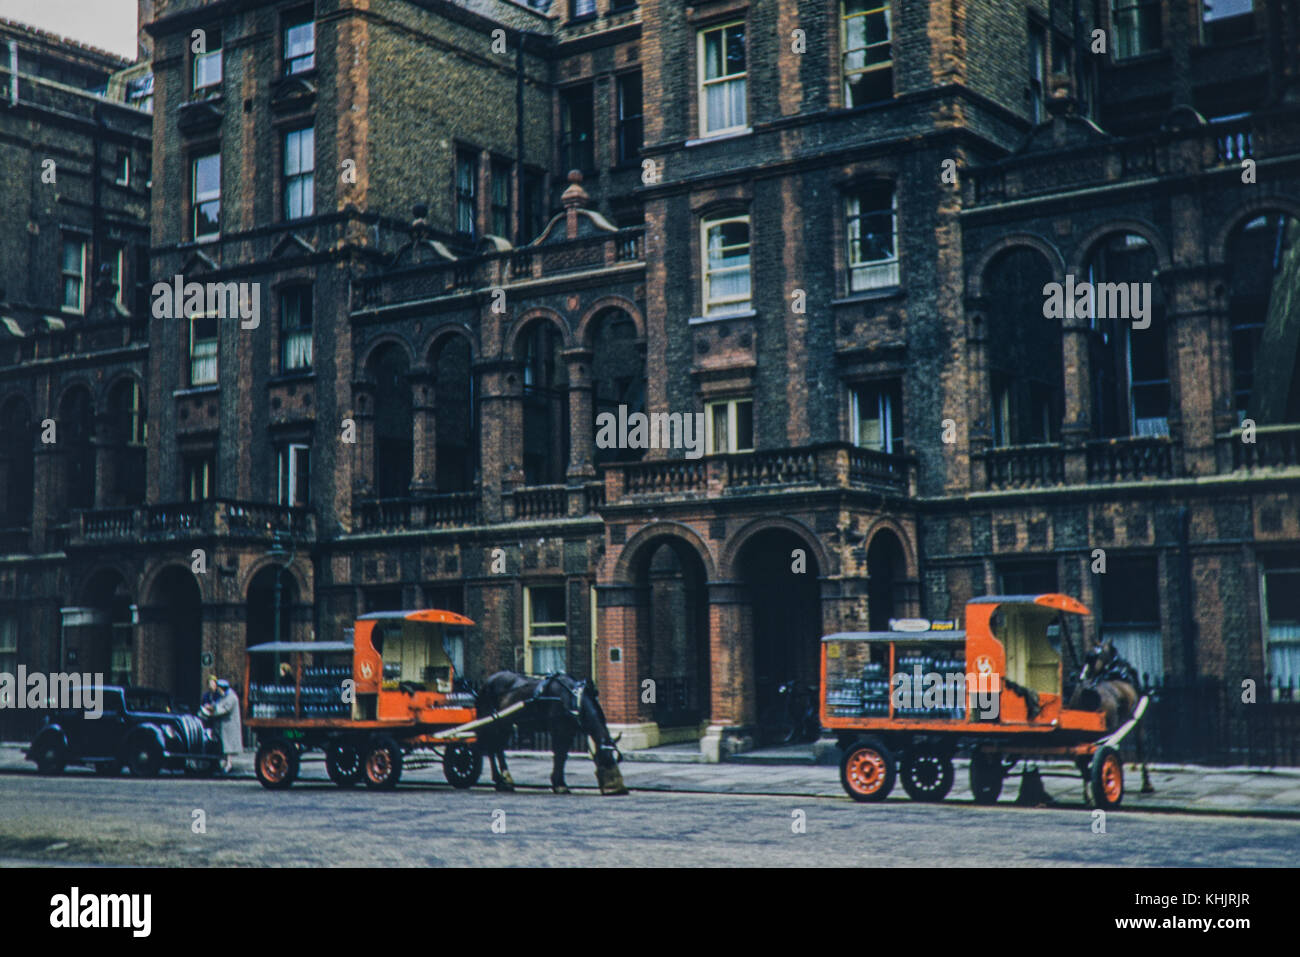 Horse drawn milk delivery at Bolton House, London on 15/07/56. Please note that due to the age of the image, imperfections might be visible. Stock Photo